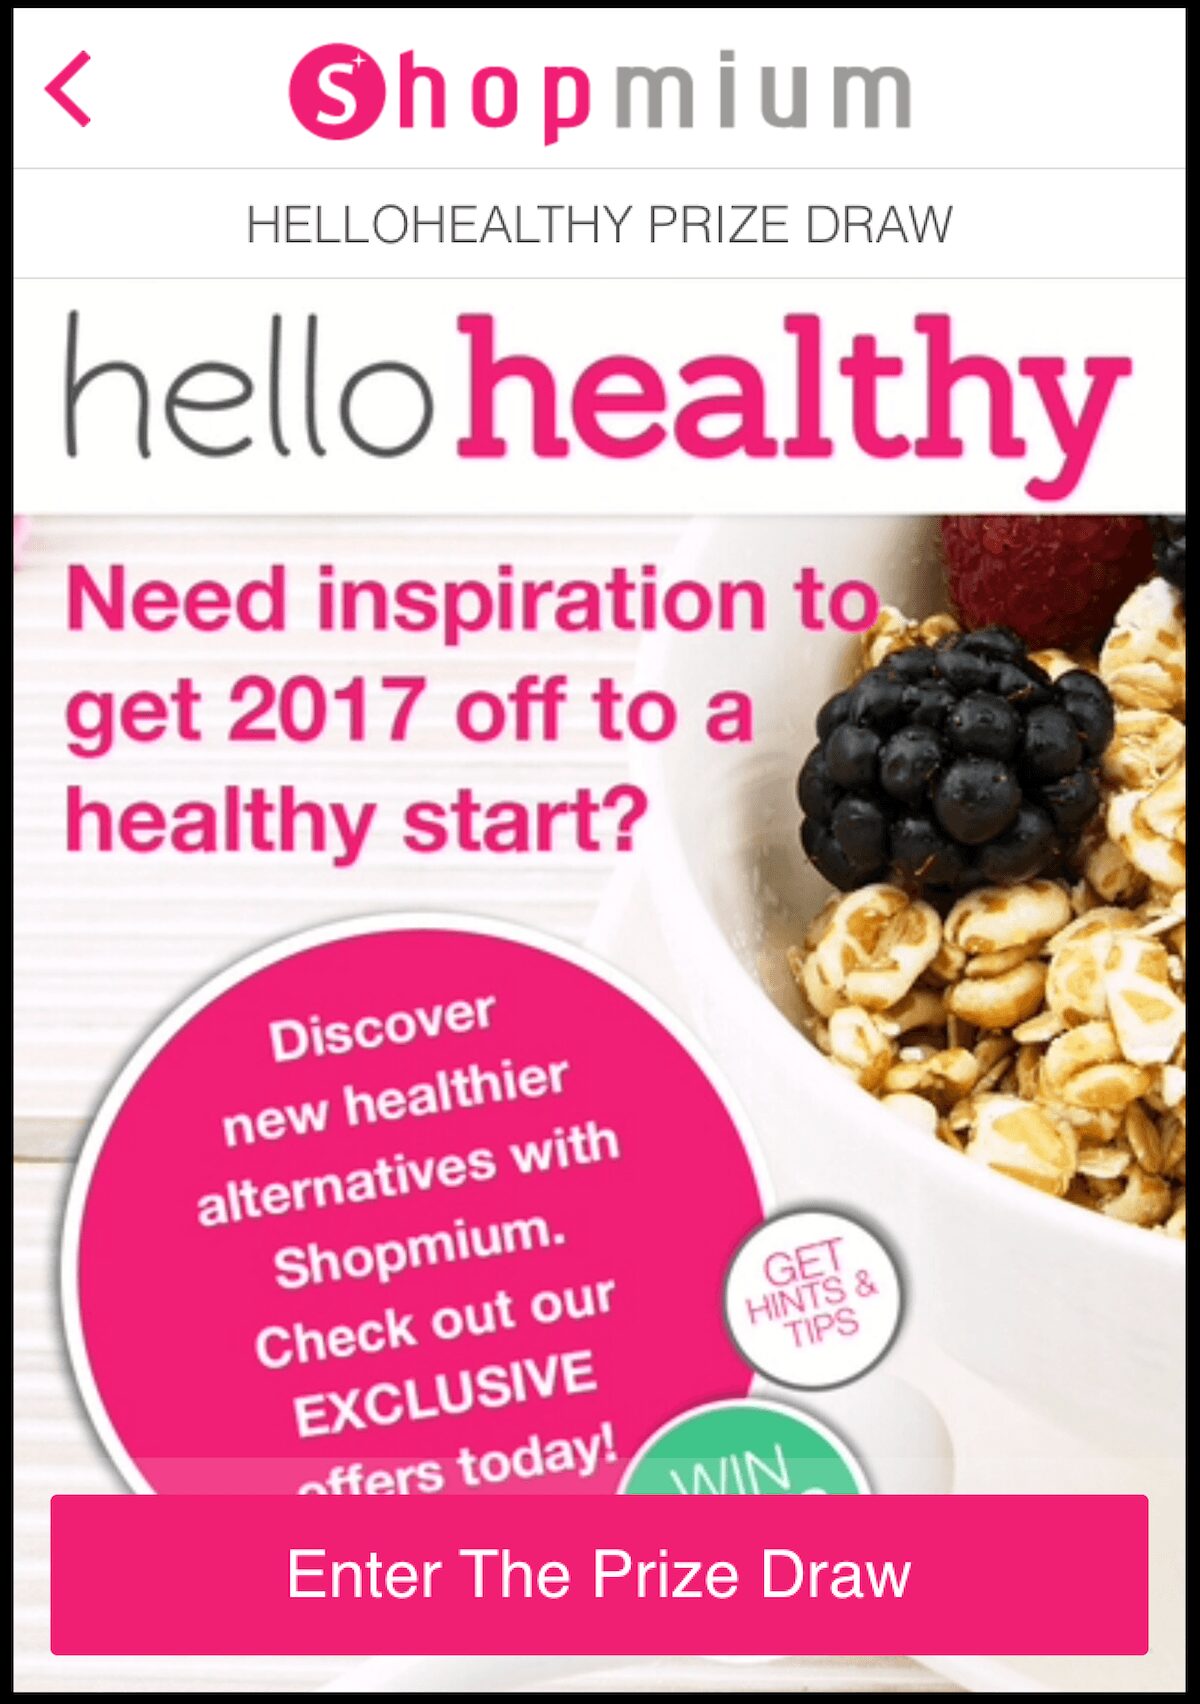 Hellohealthy on Shopmium review and competition news